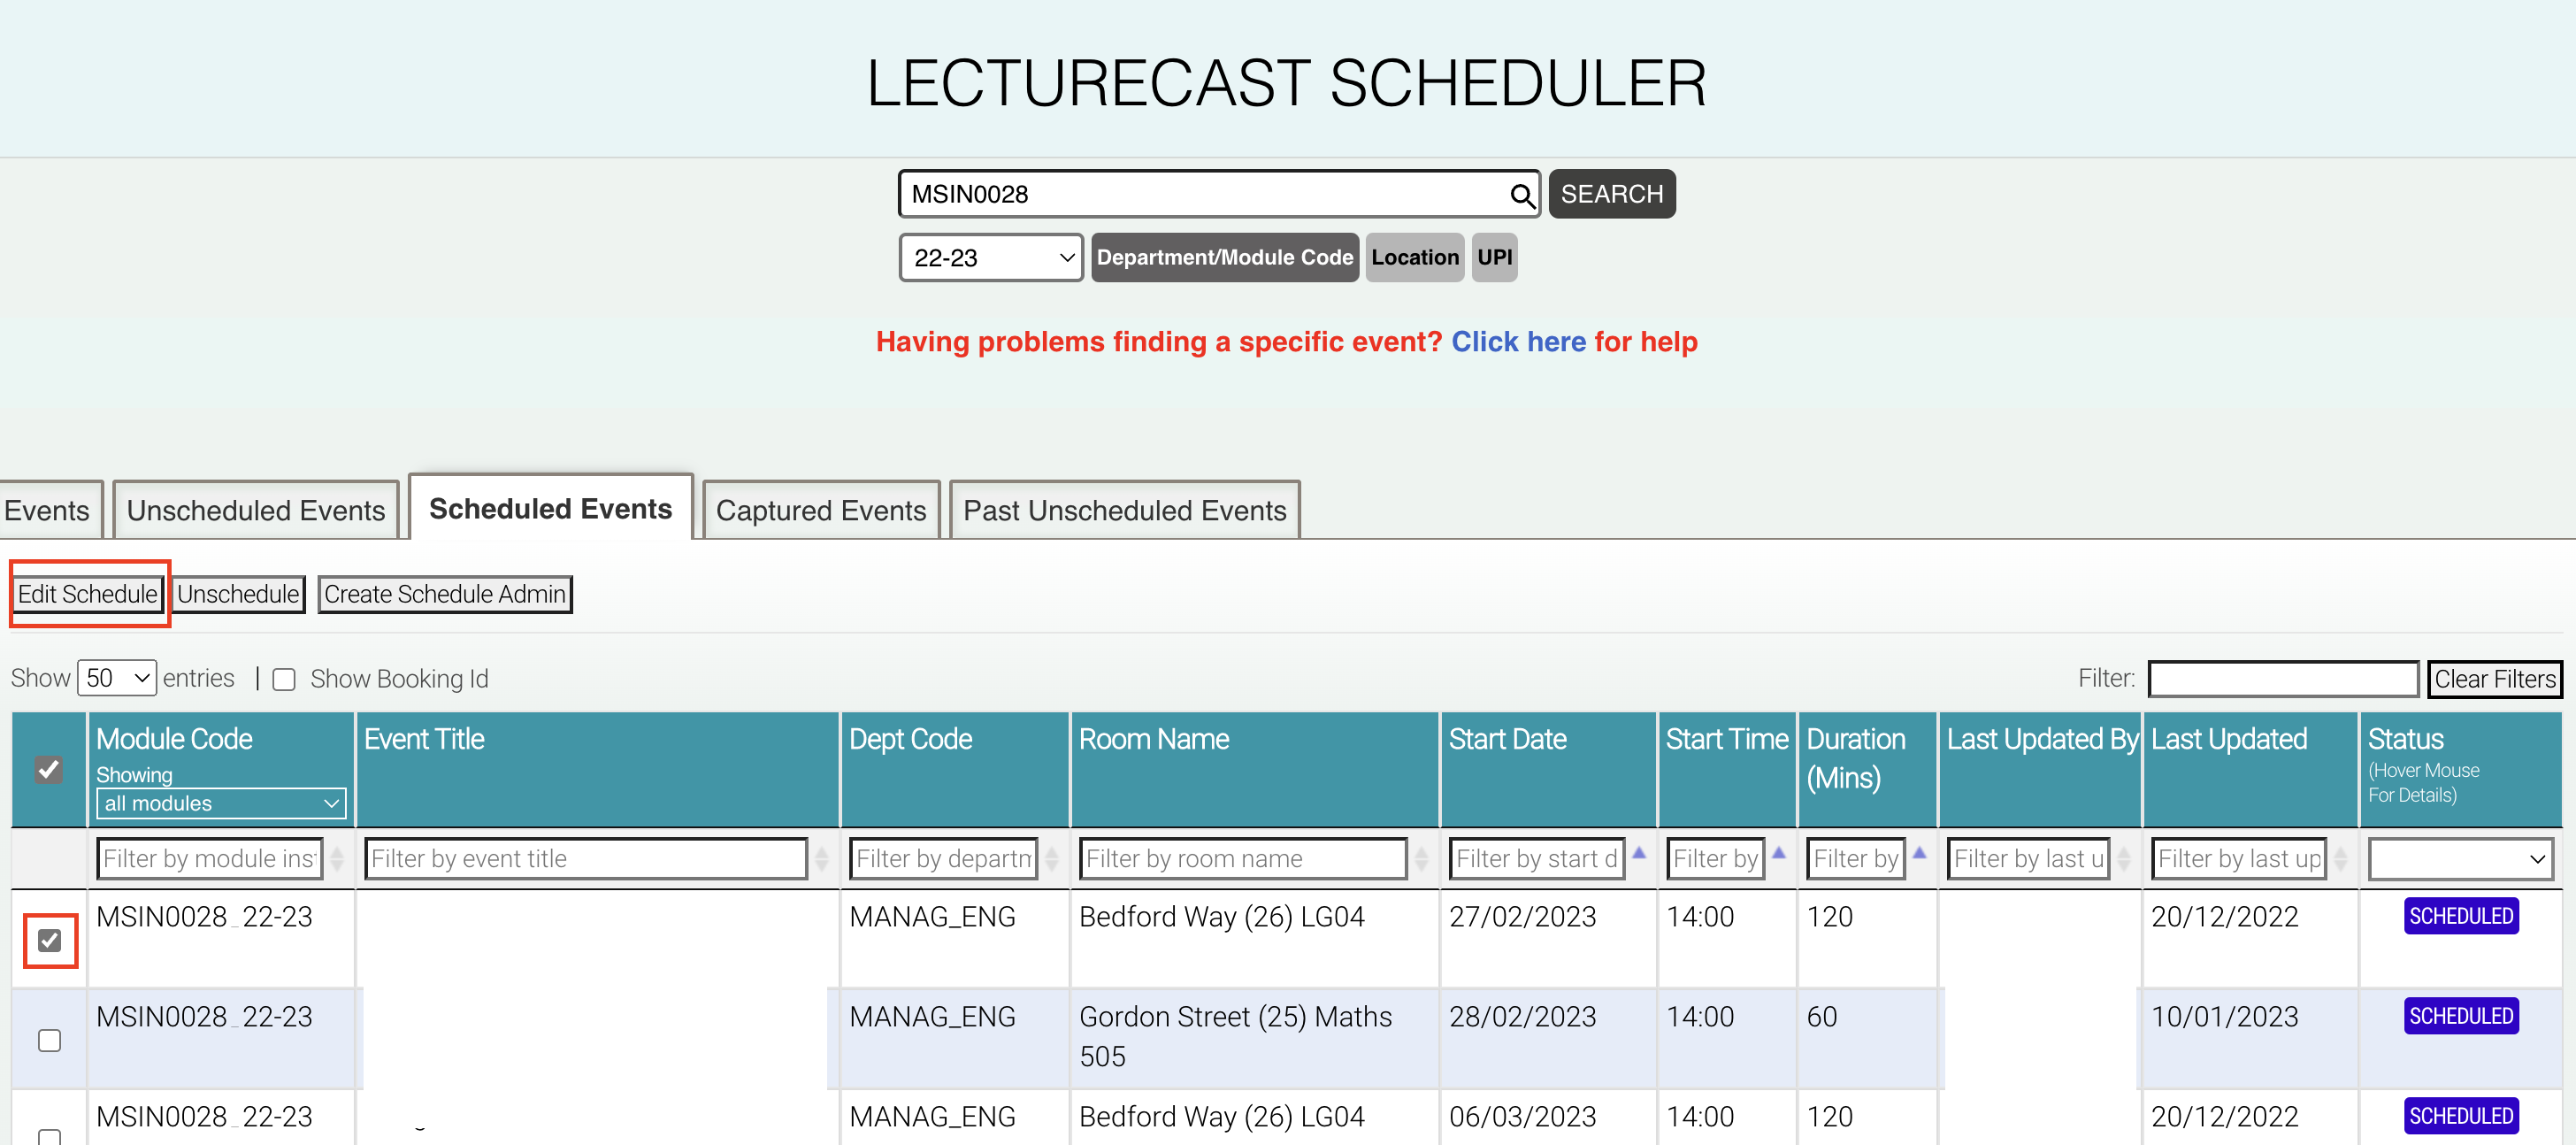 A screenshot of the Lecturecast Scheduler page with the 'Edit Schedule' button and a event checkbox highlighted.